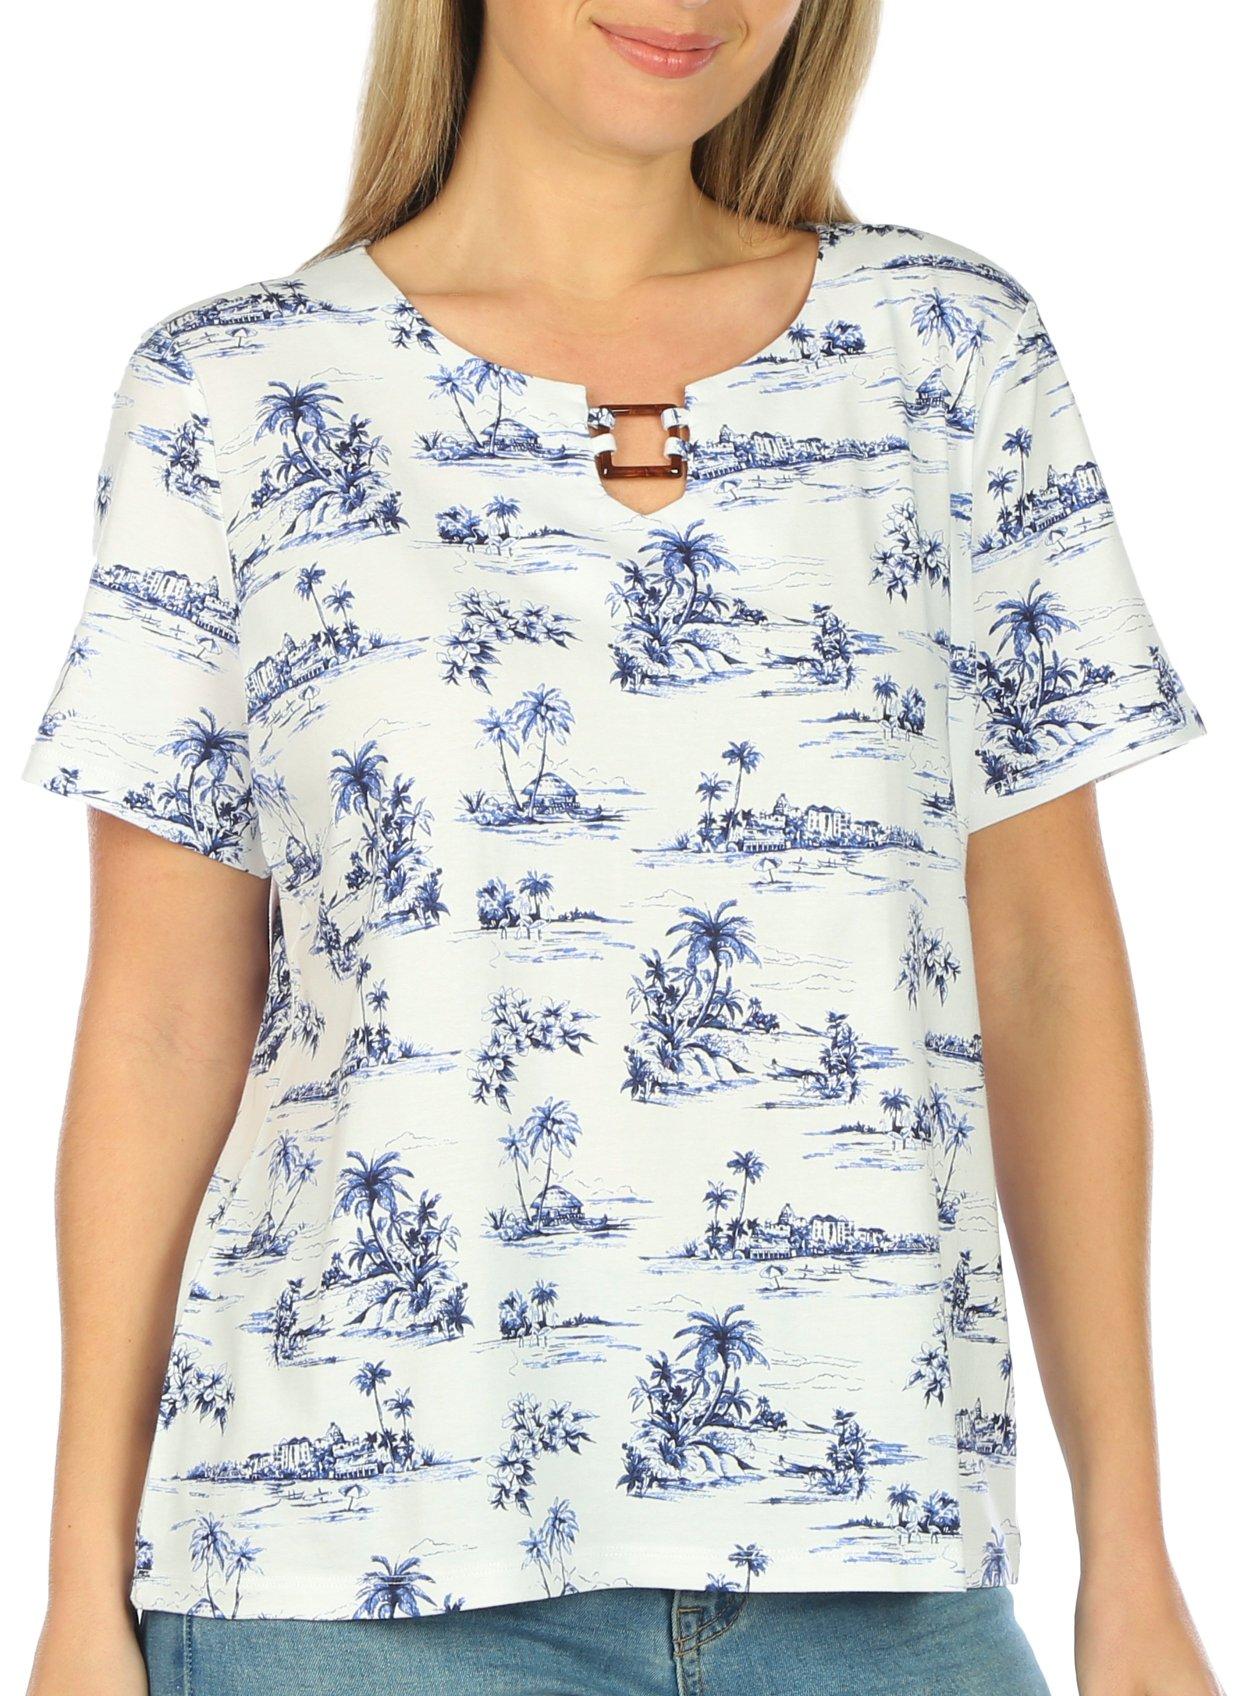 Coral Bay Petite Print Square Ring Keyhole Short Sleeve Top